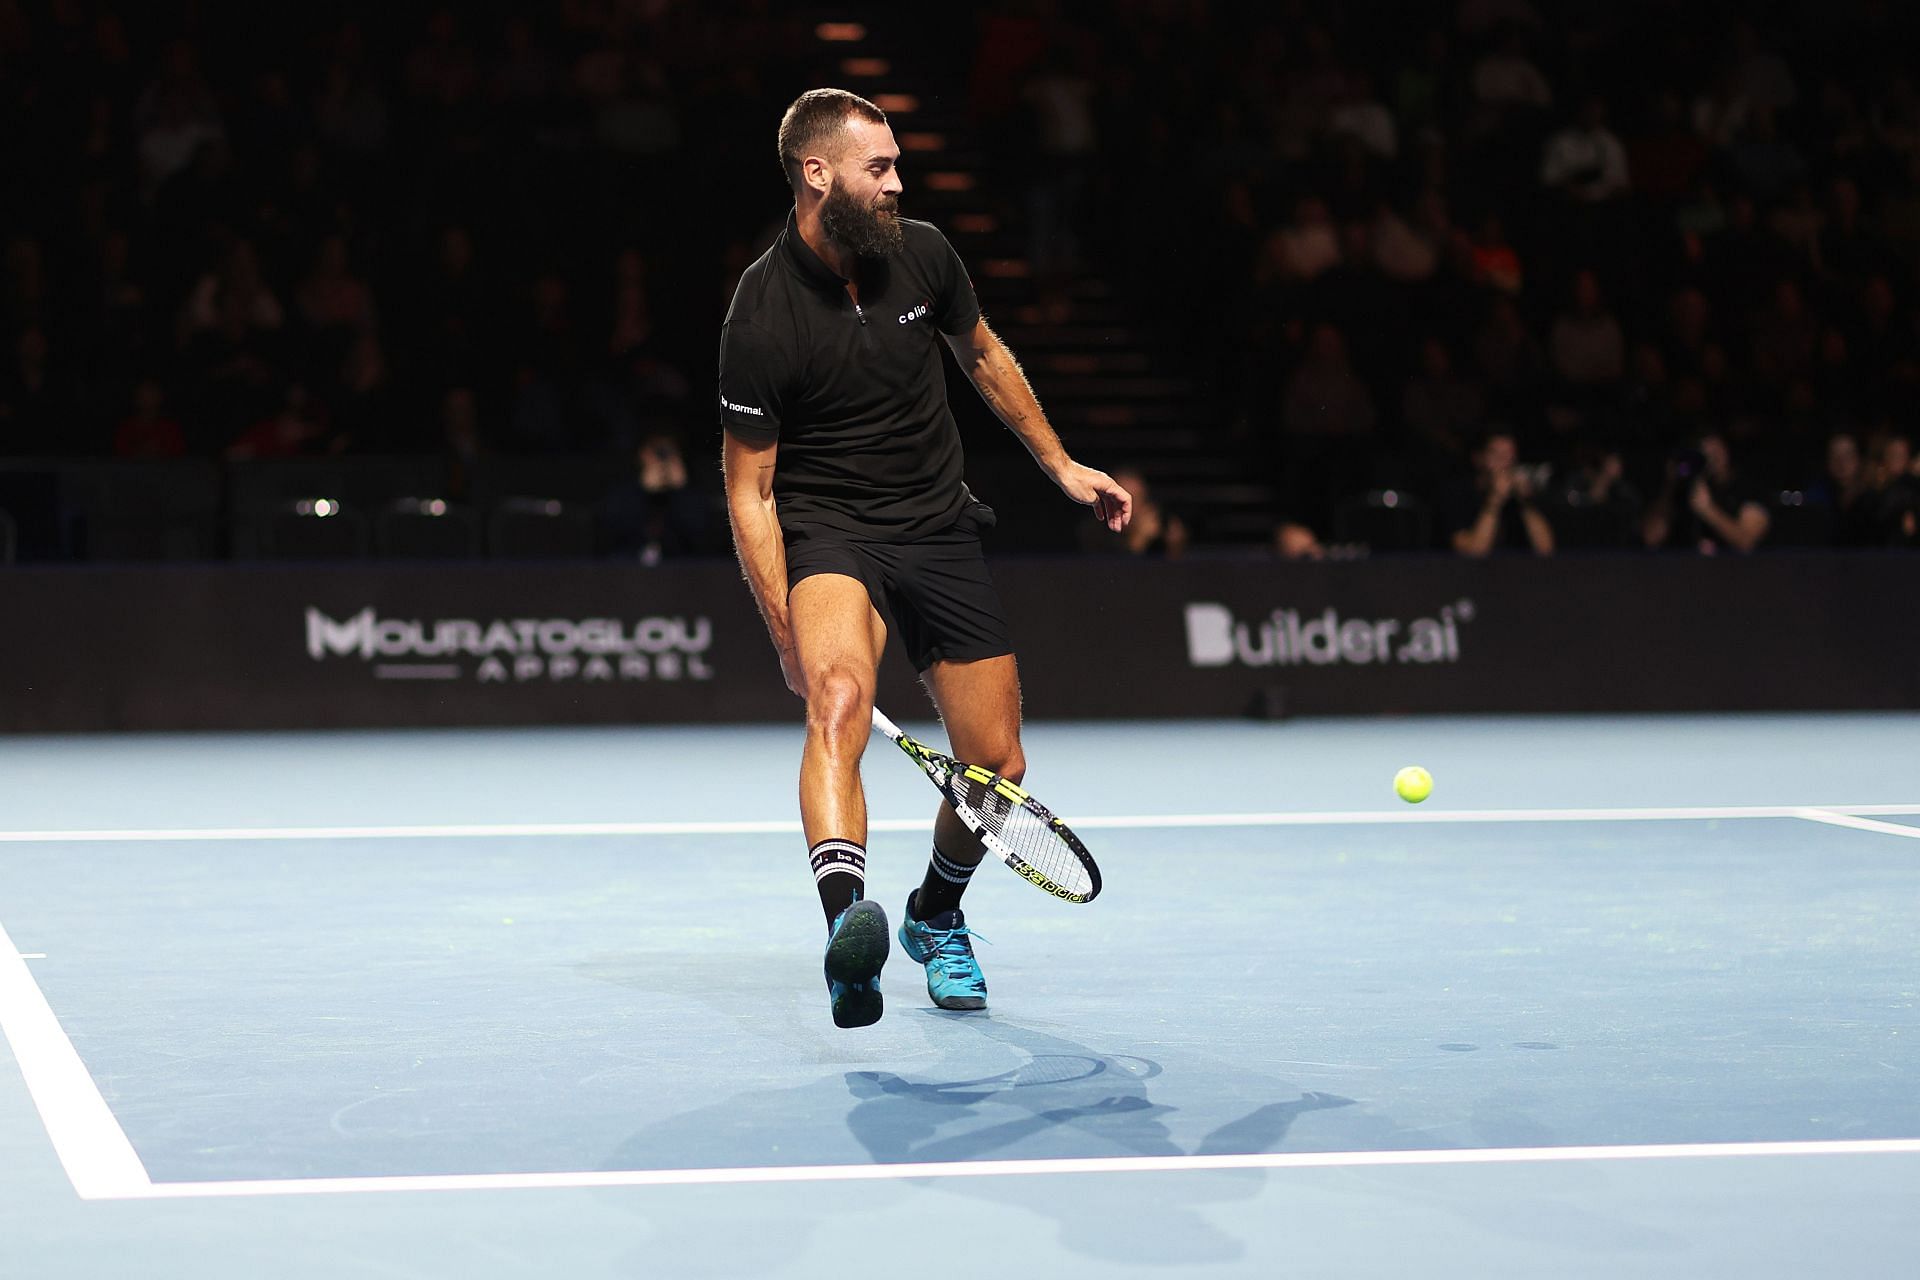 Benoit Paire in action at UTS grand final London